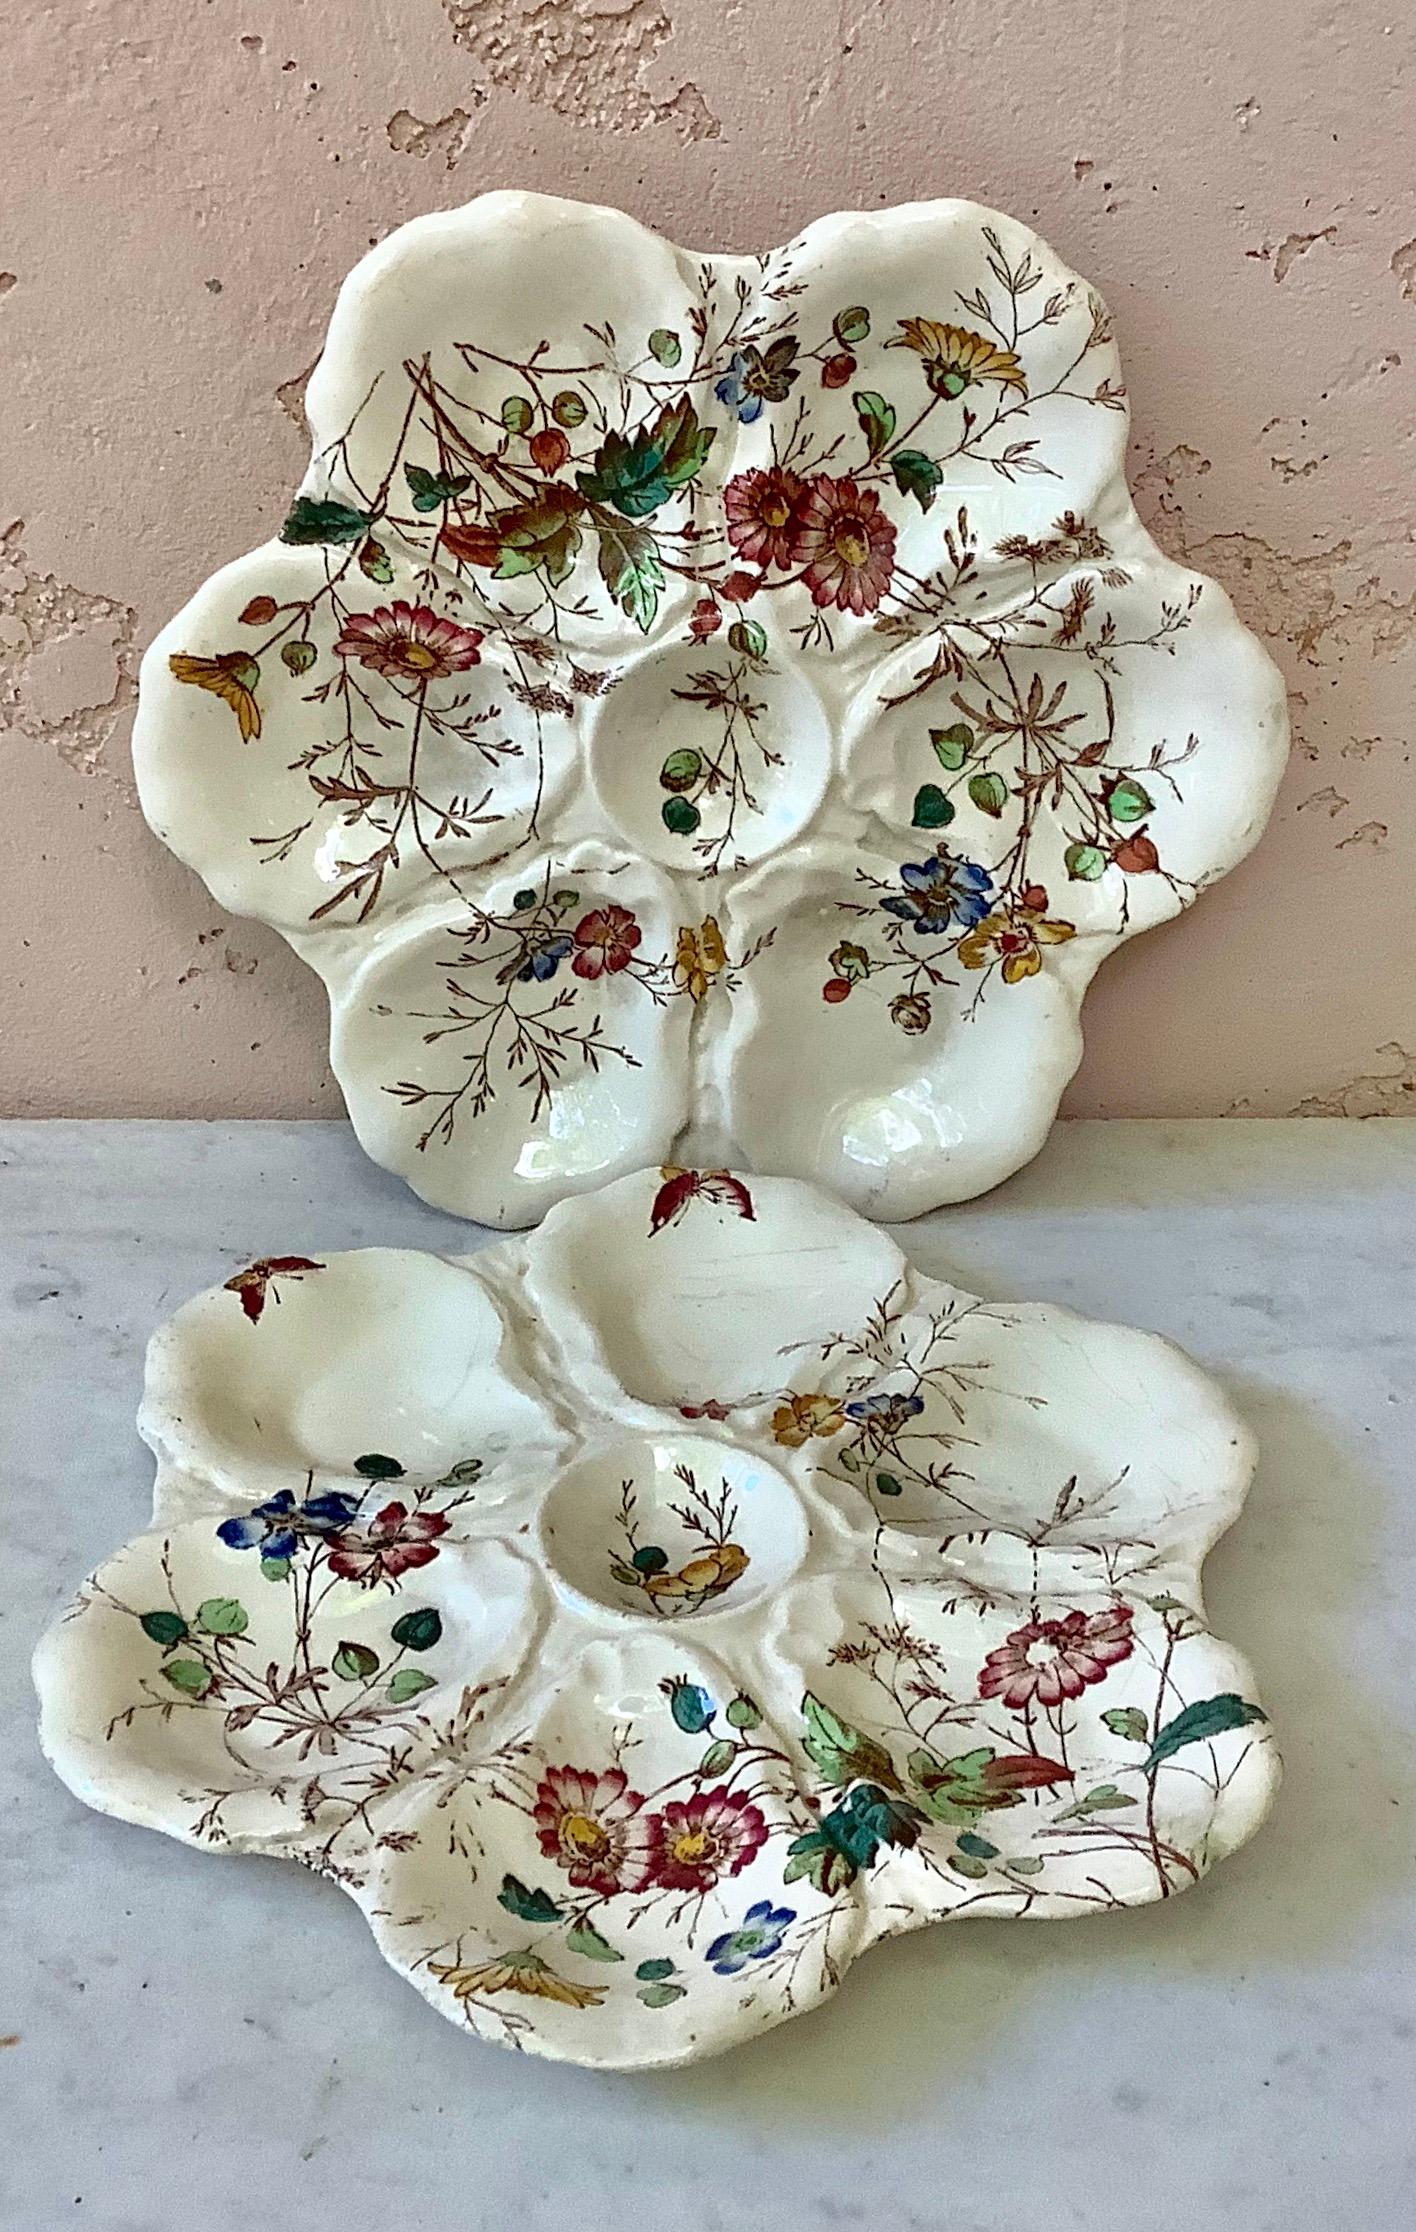 Late 19th Century 19th Century English Majolica Oyster Plate with Flowers Adderley